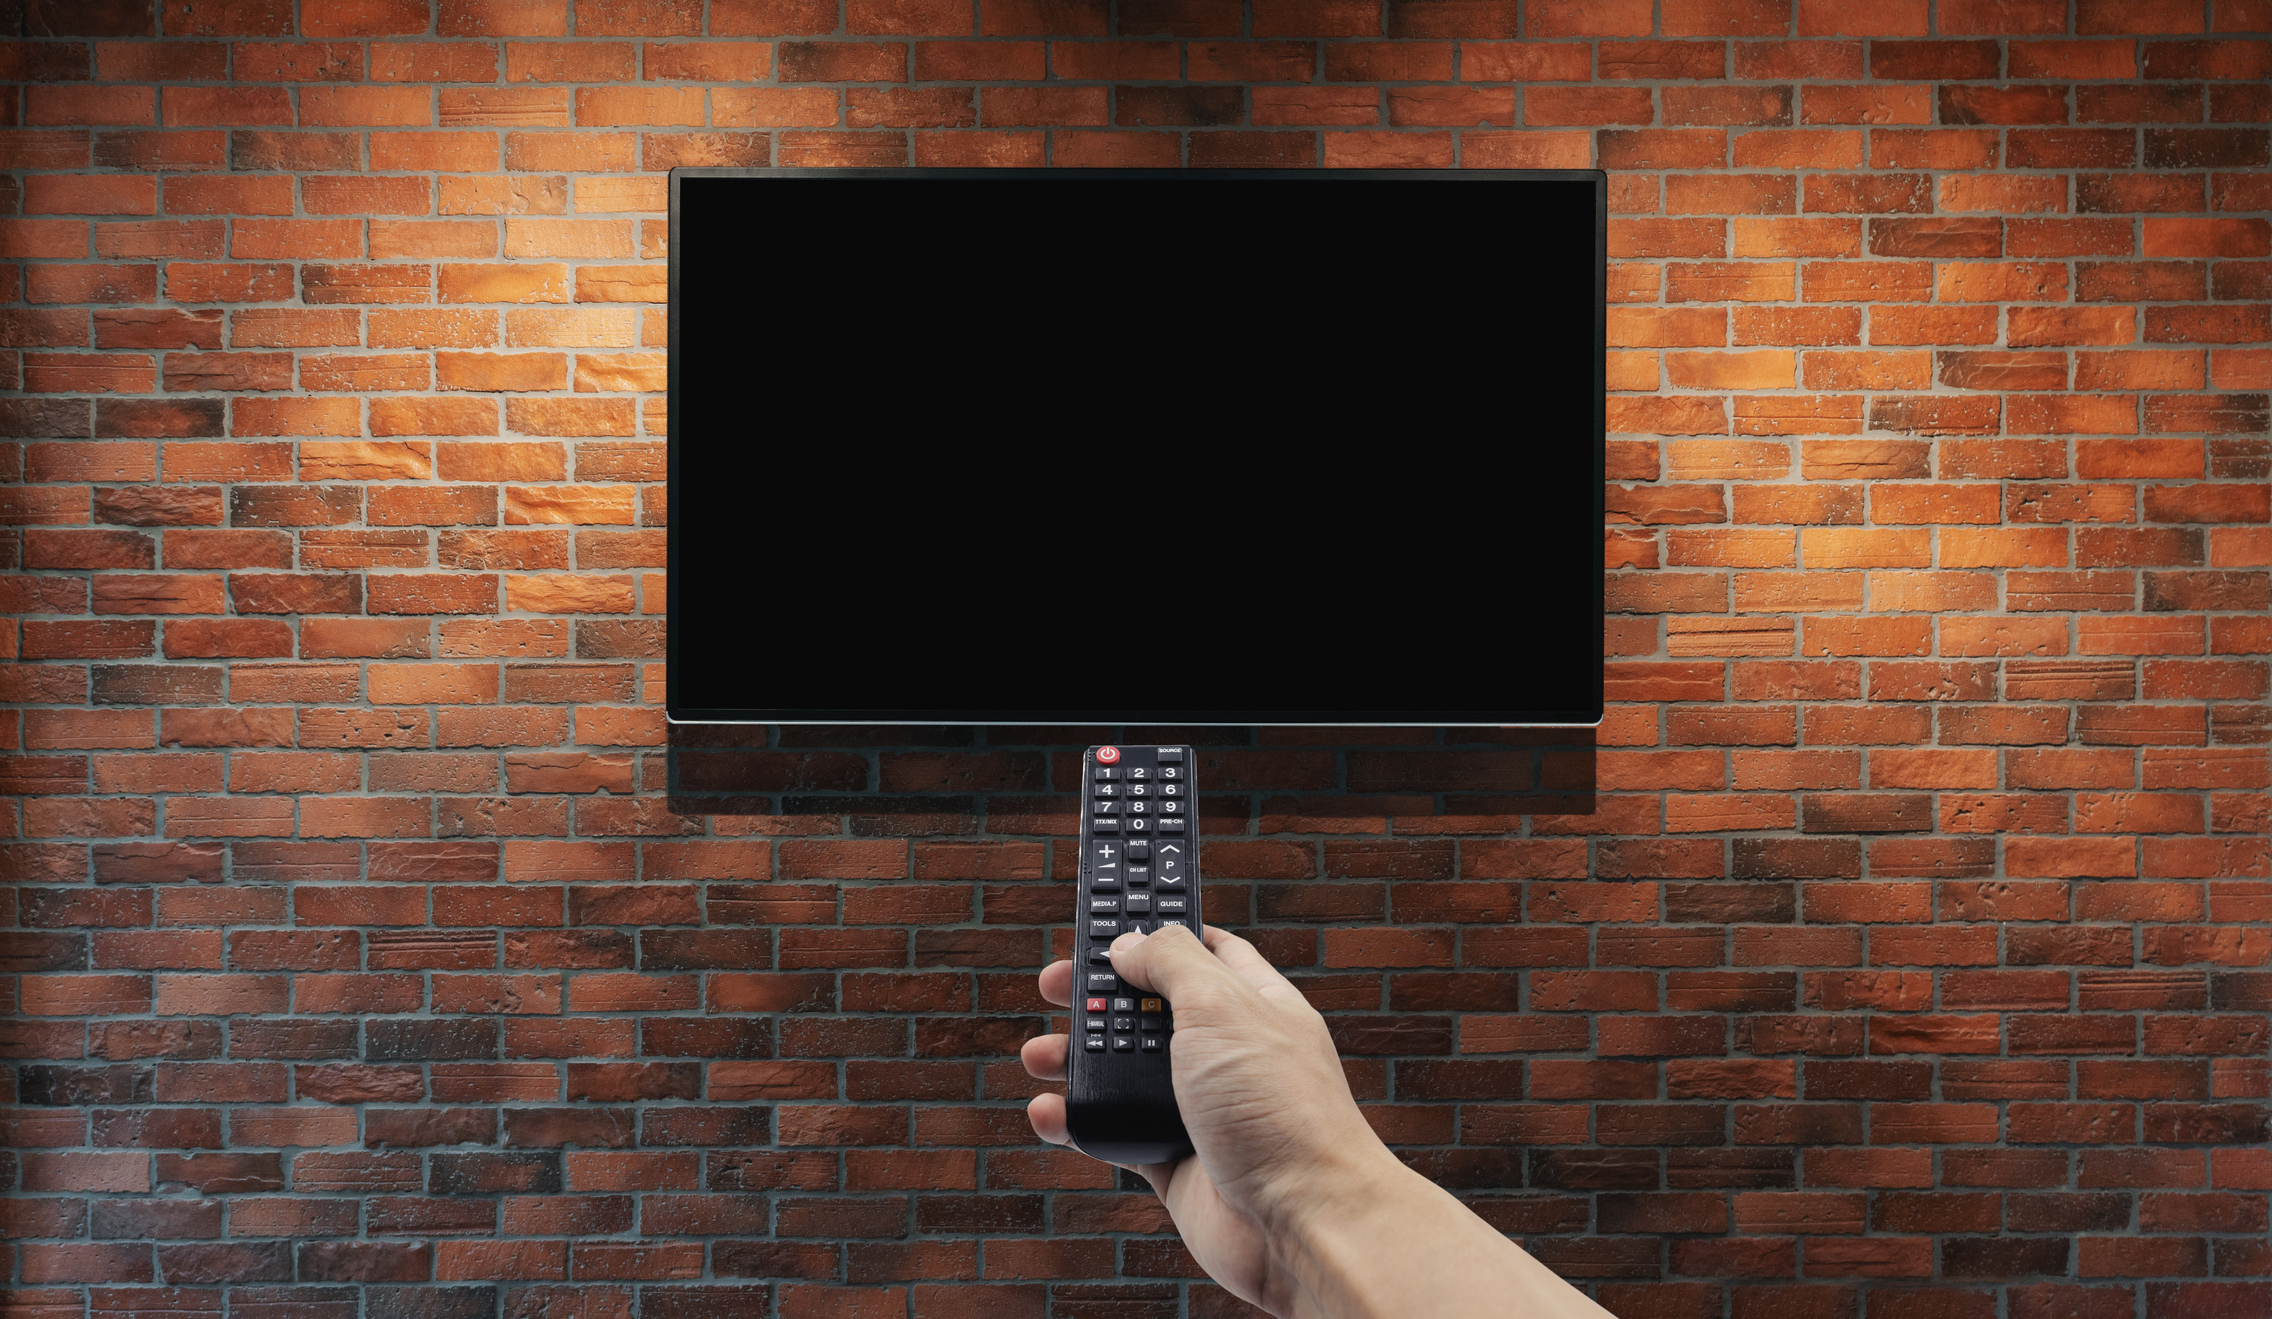 Television on brick wall with hand using remote control